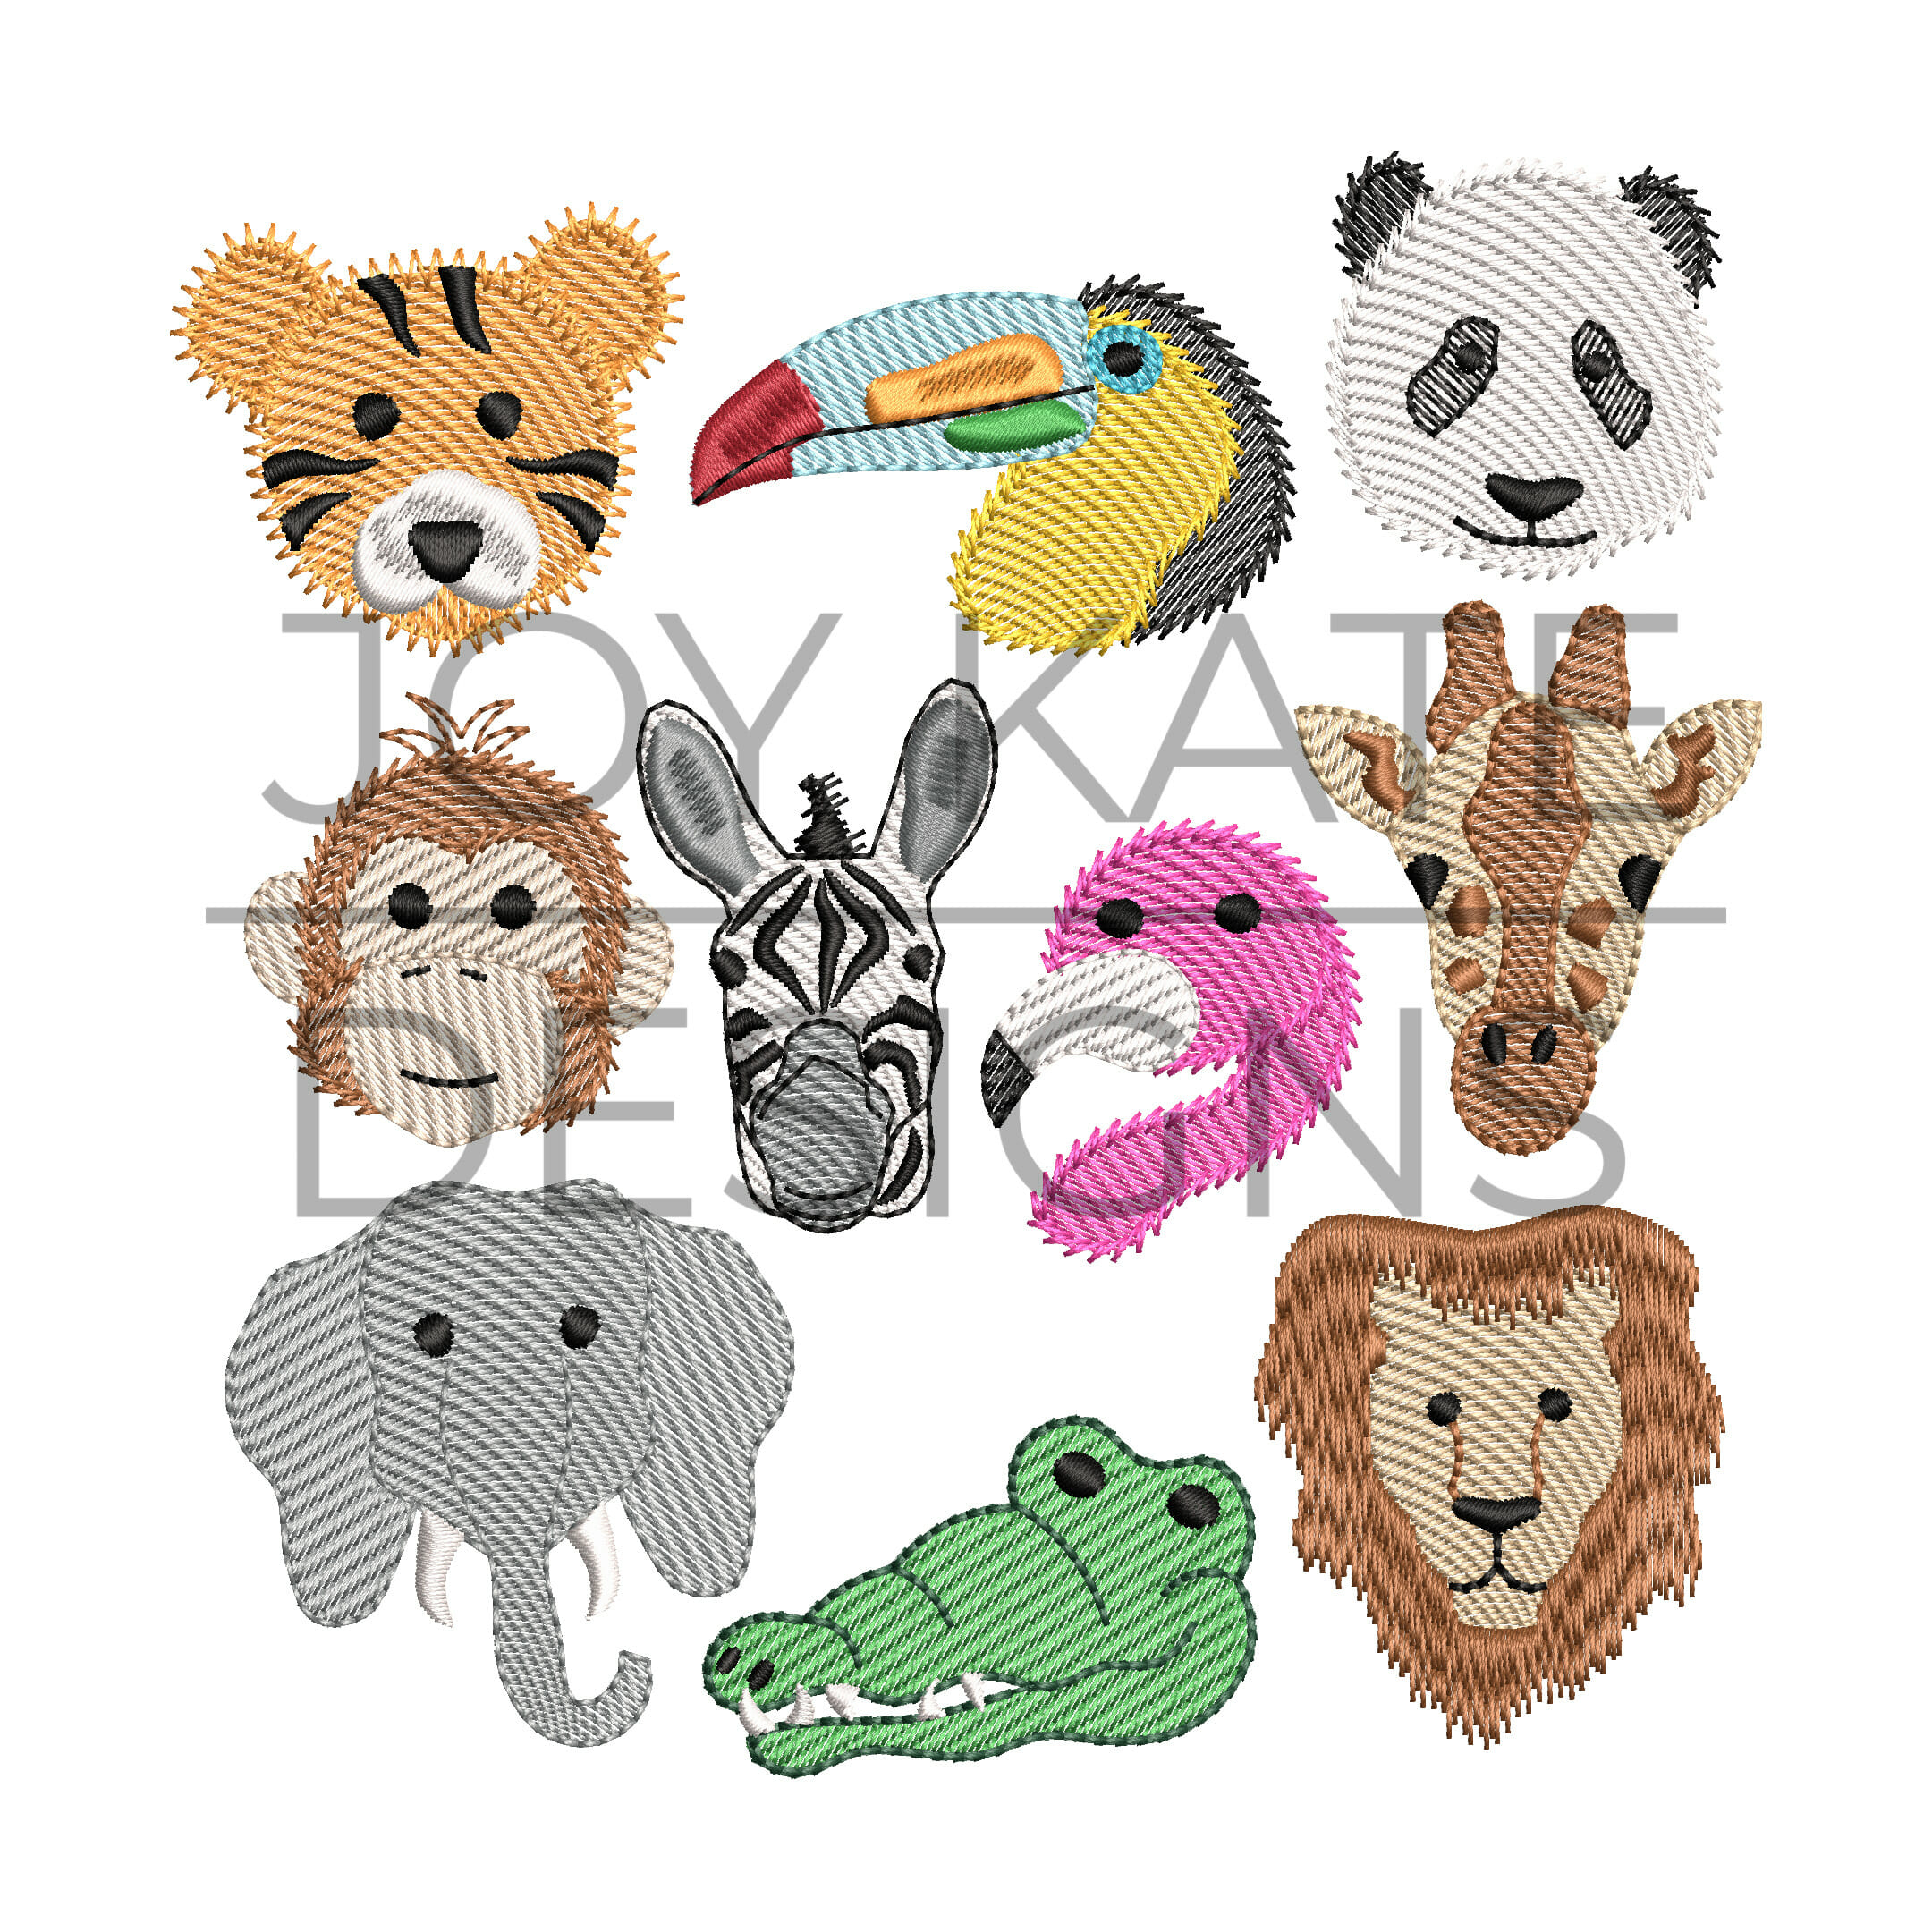 Animal Embroidery Patterns Build Your Own Zoo Animal Set Embroidery Design